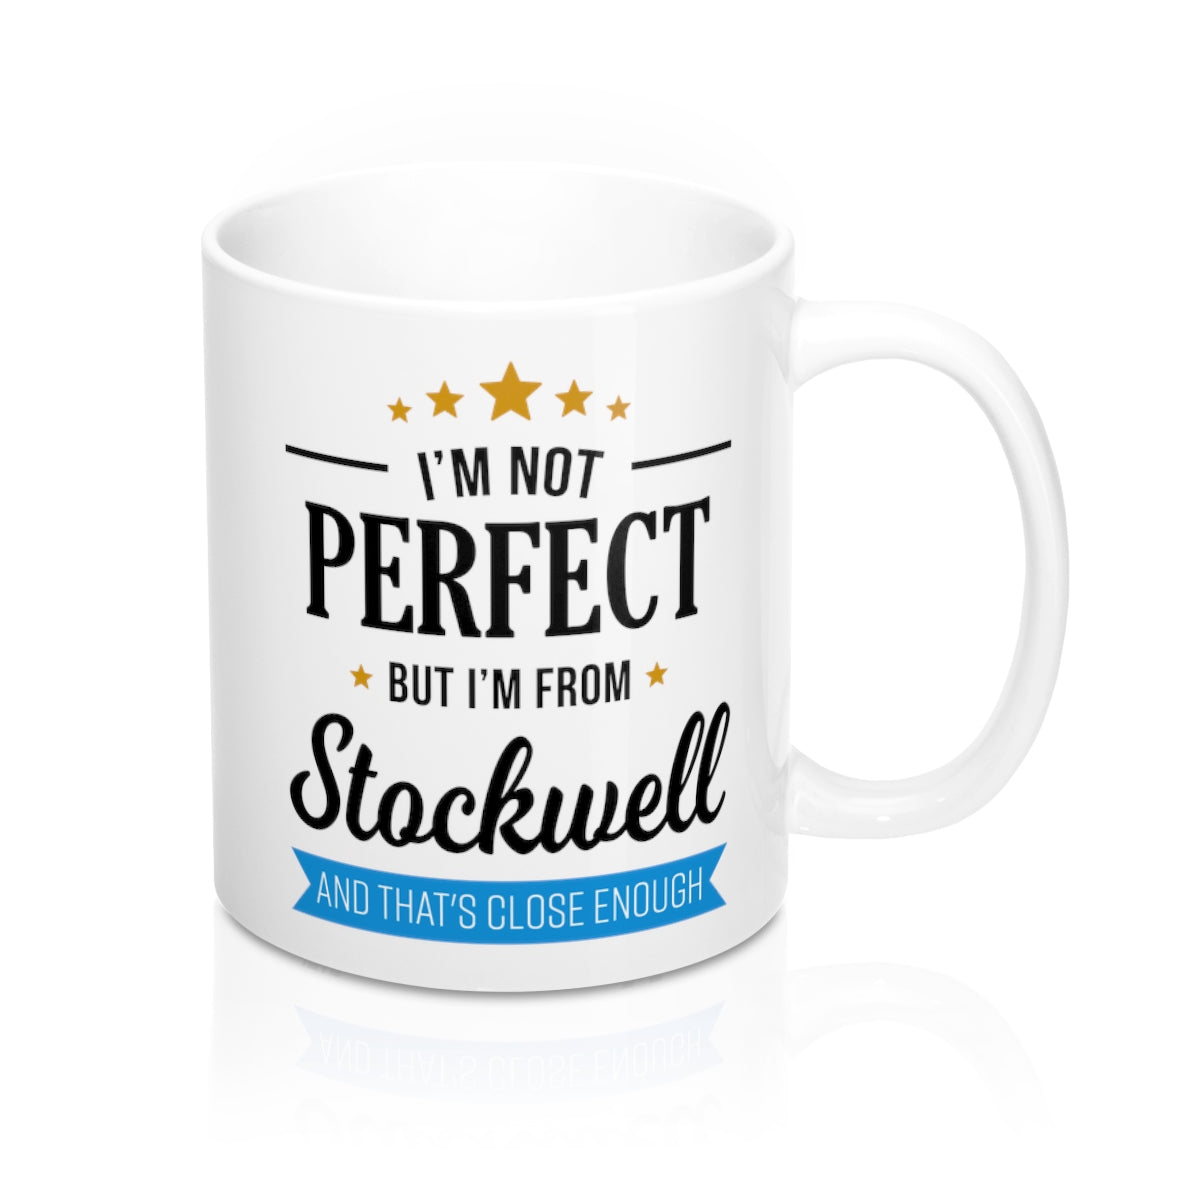 I'm Not Perfect But I'm From Stockwell Mug